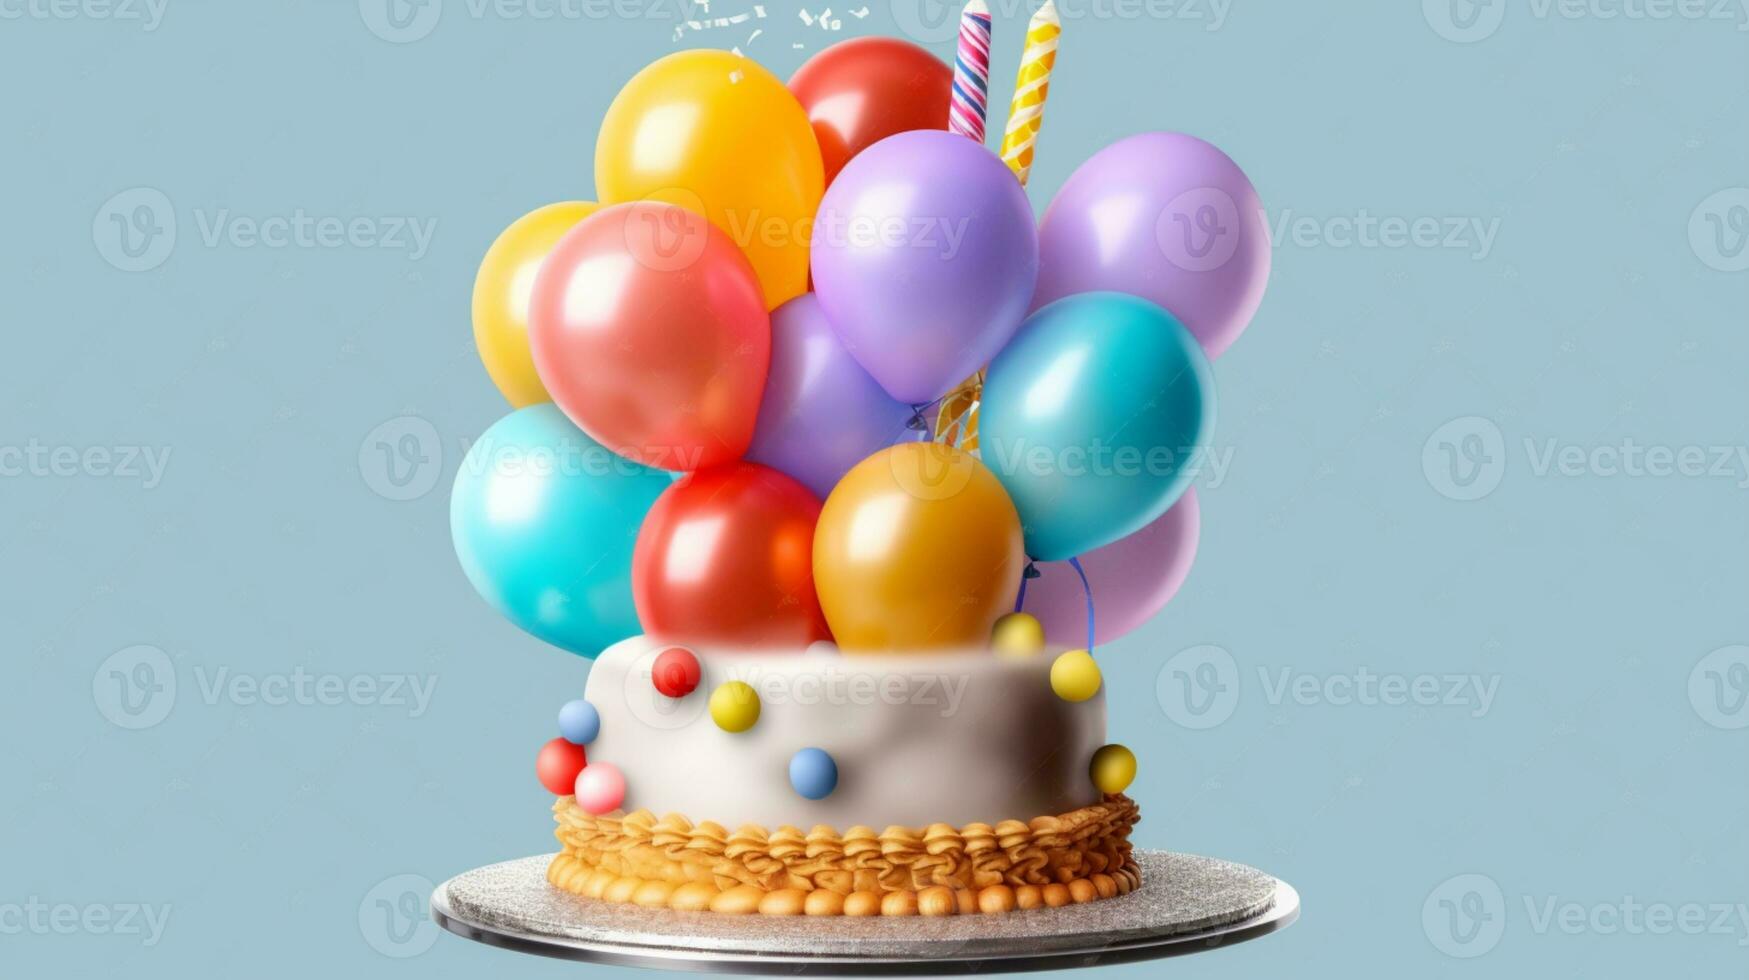 colorful balloon with birthday cake 3d design photo